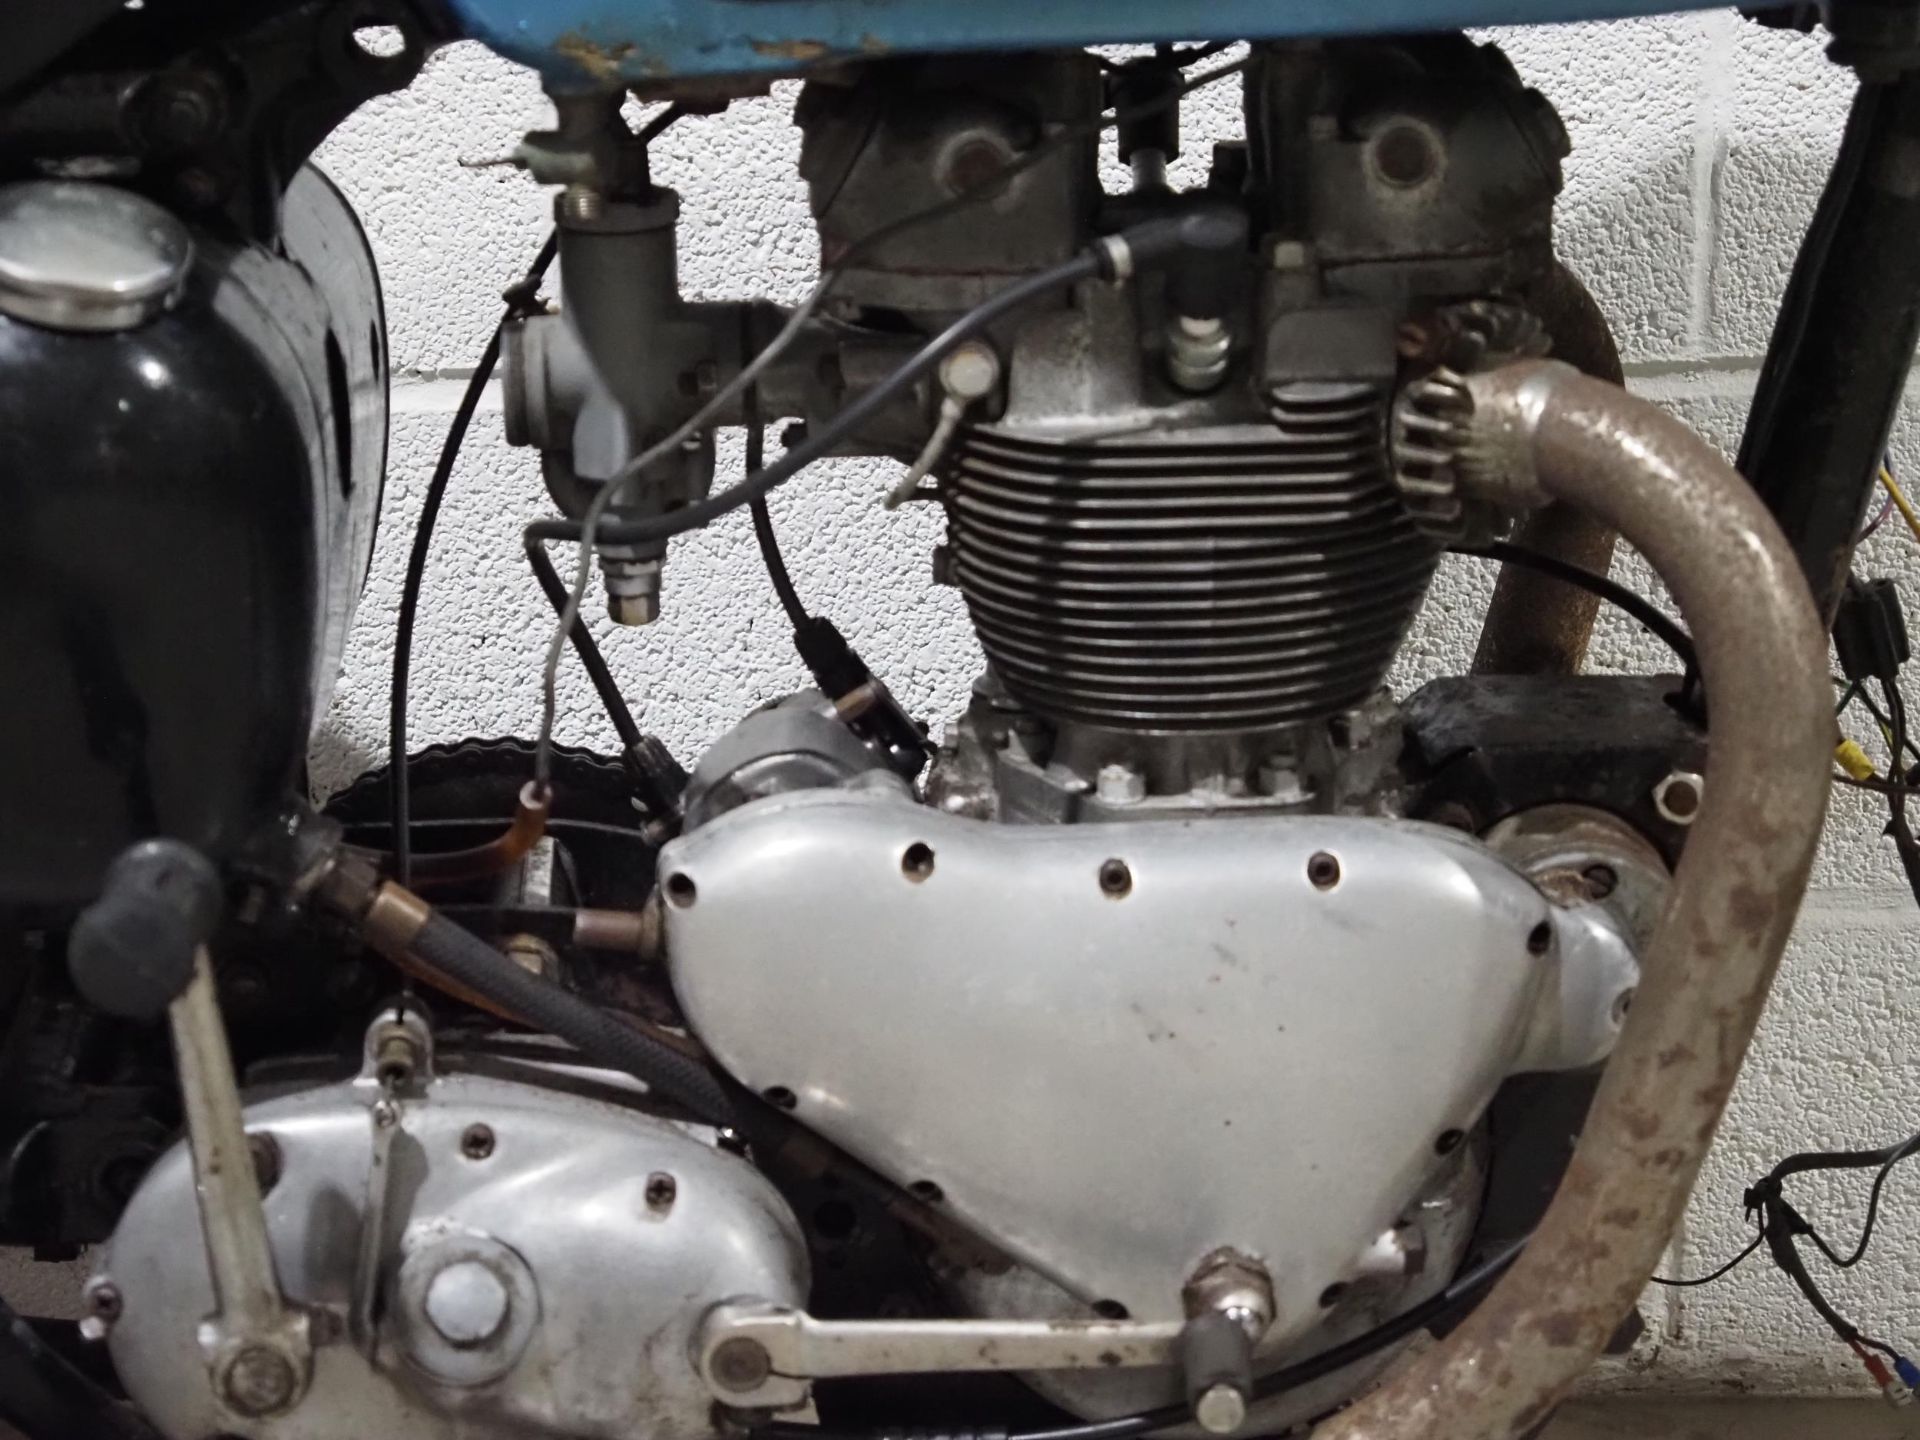 Triumph Tiger 100 motorcycle project. 1958. 498cc. Frame No. 014659 Engine No. T10077574 No docs. - Image 4 of 6